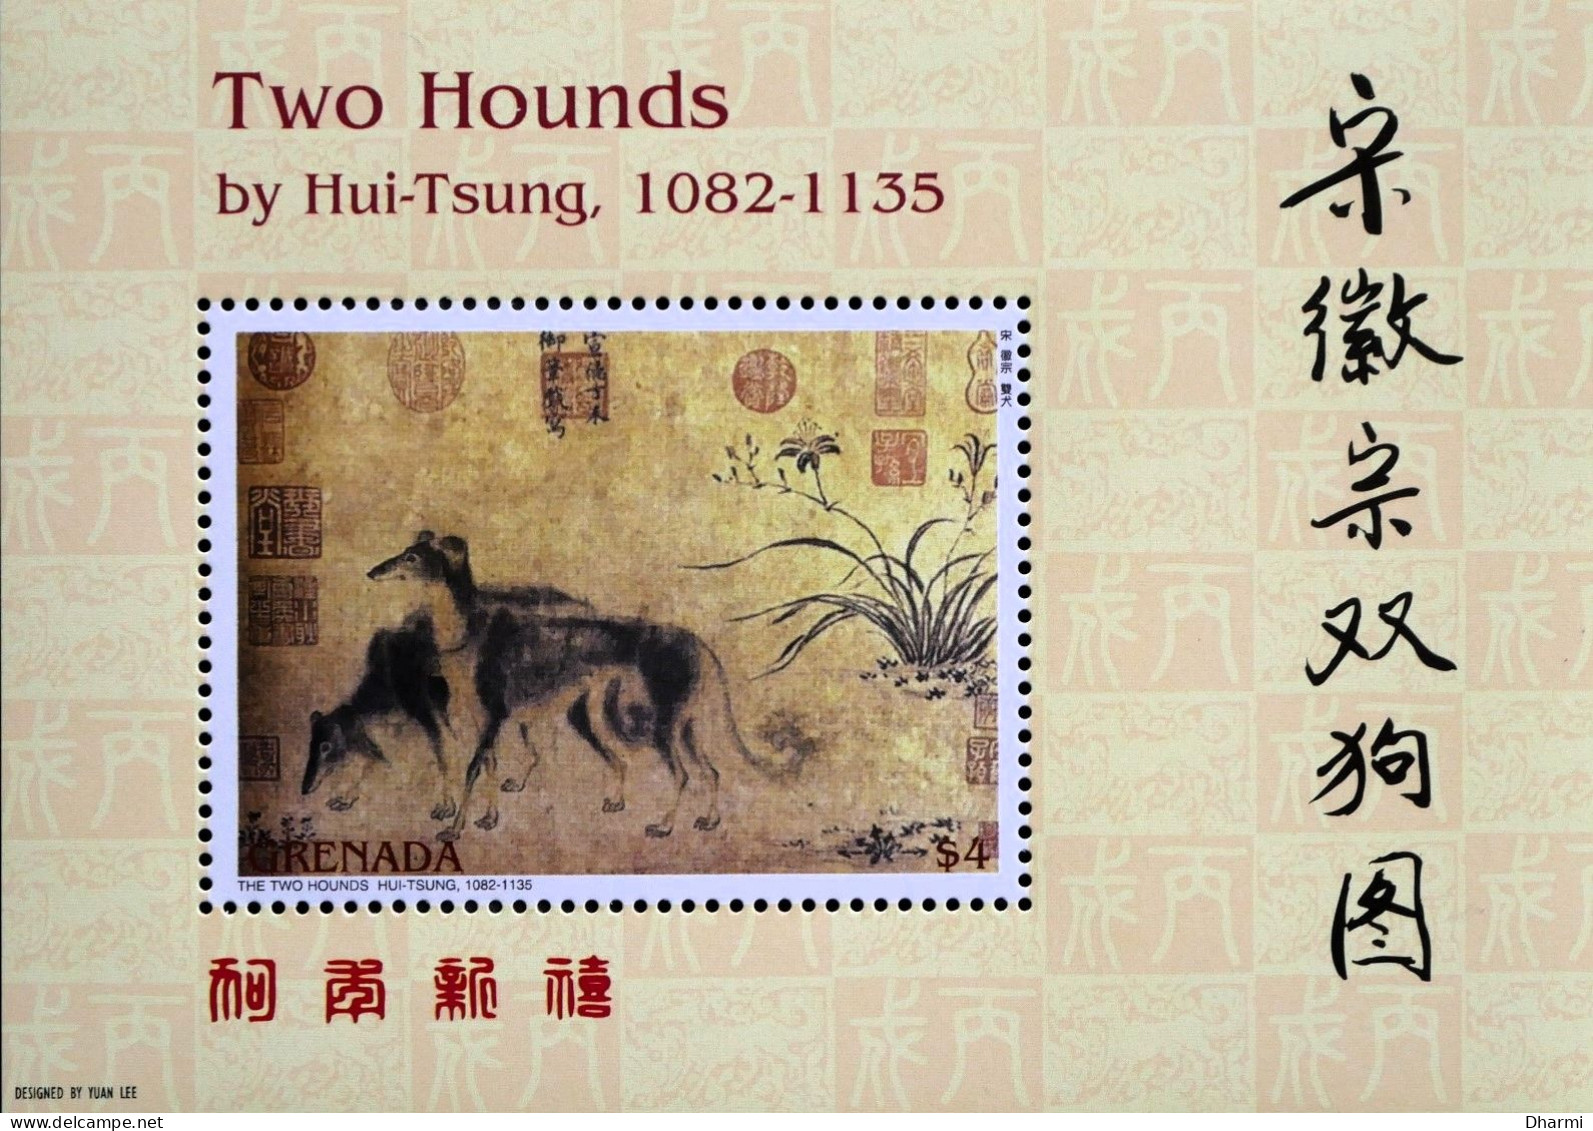 GRENADE GRENADA - LUNAR YEAR OF THE DOG 2006 - MNH** - CHINESE ASTROLOGY - ANNEE LUNAIRE CHIEN - NEUF ** - COT. 5.50 € - Grenada (1974-...)